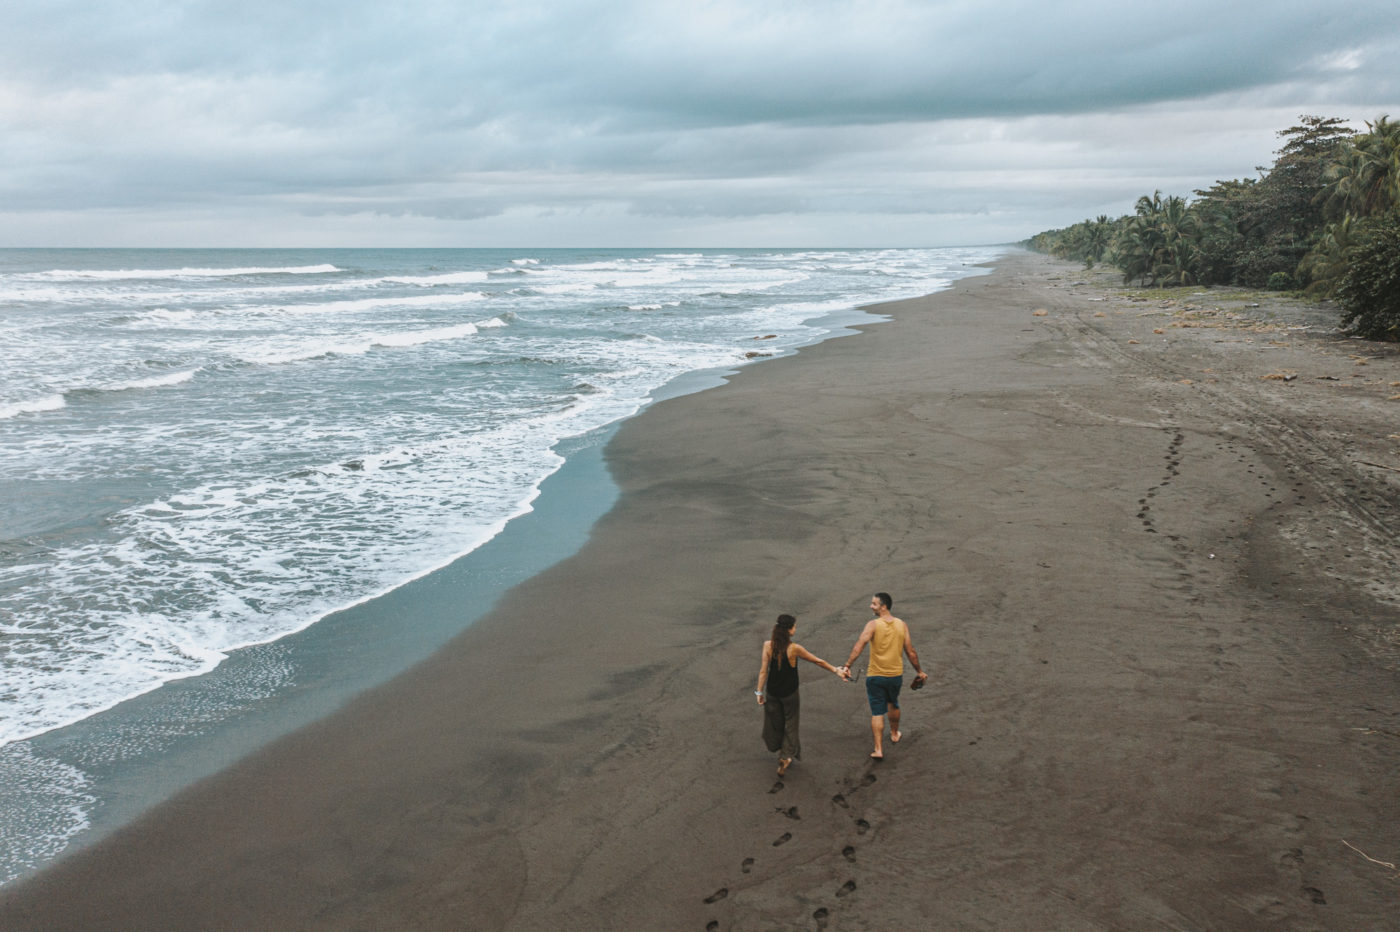 on the beach in Tortuguero National Park, Costa Rica